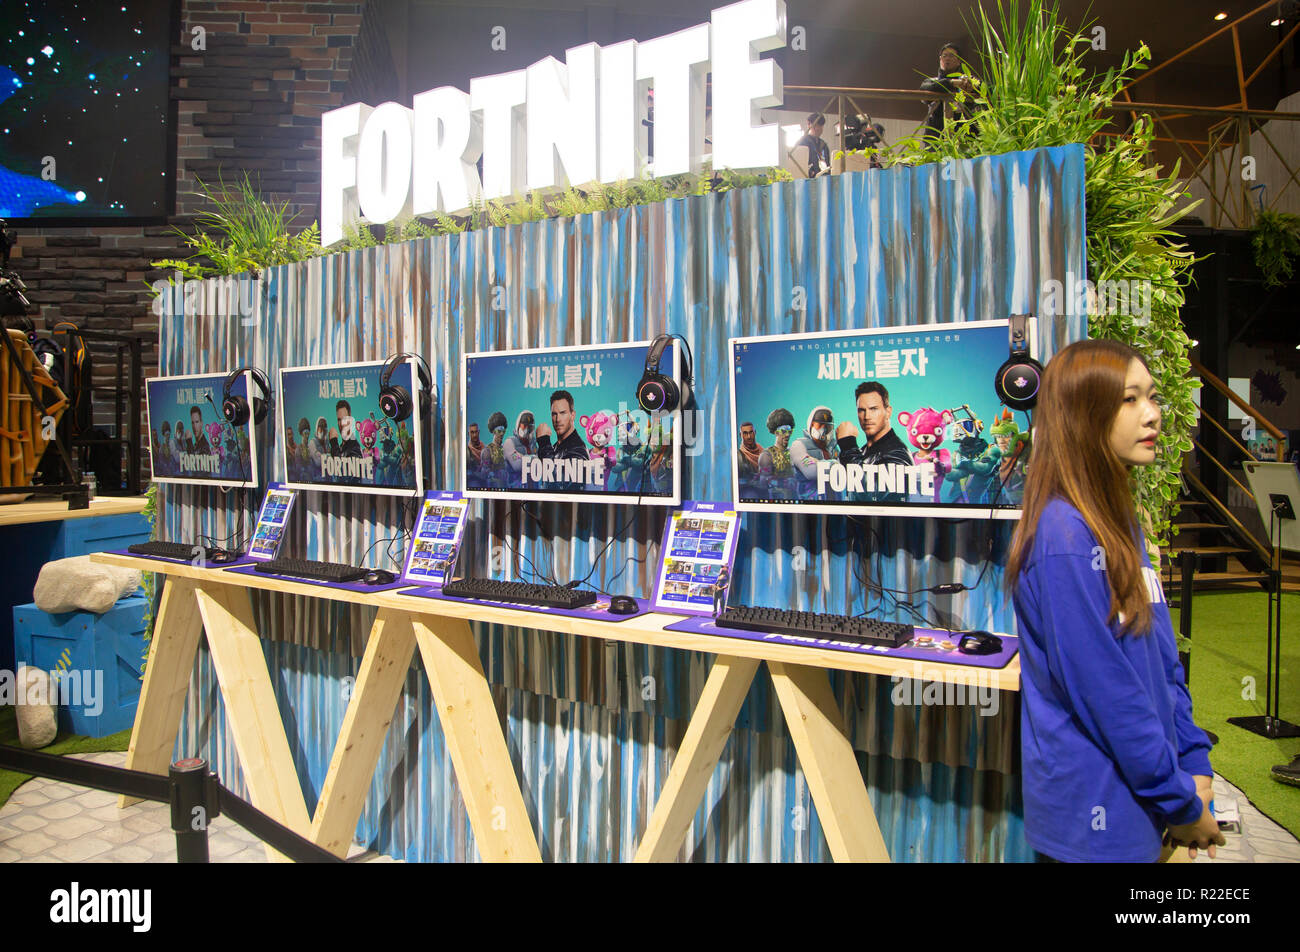 G-Star Global Game Exhibition, Nov 15, 2018 : Promotional booth of online  video game Fortnite at the G-Star Global Game Exhibition in Busan, about  420 km (261 miles) southeast of Seoul, South